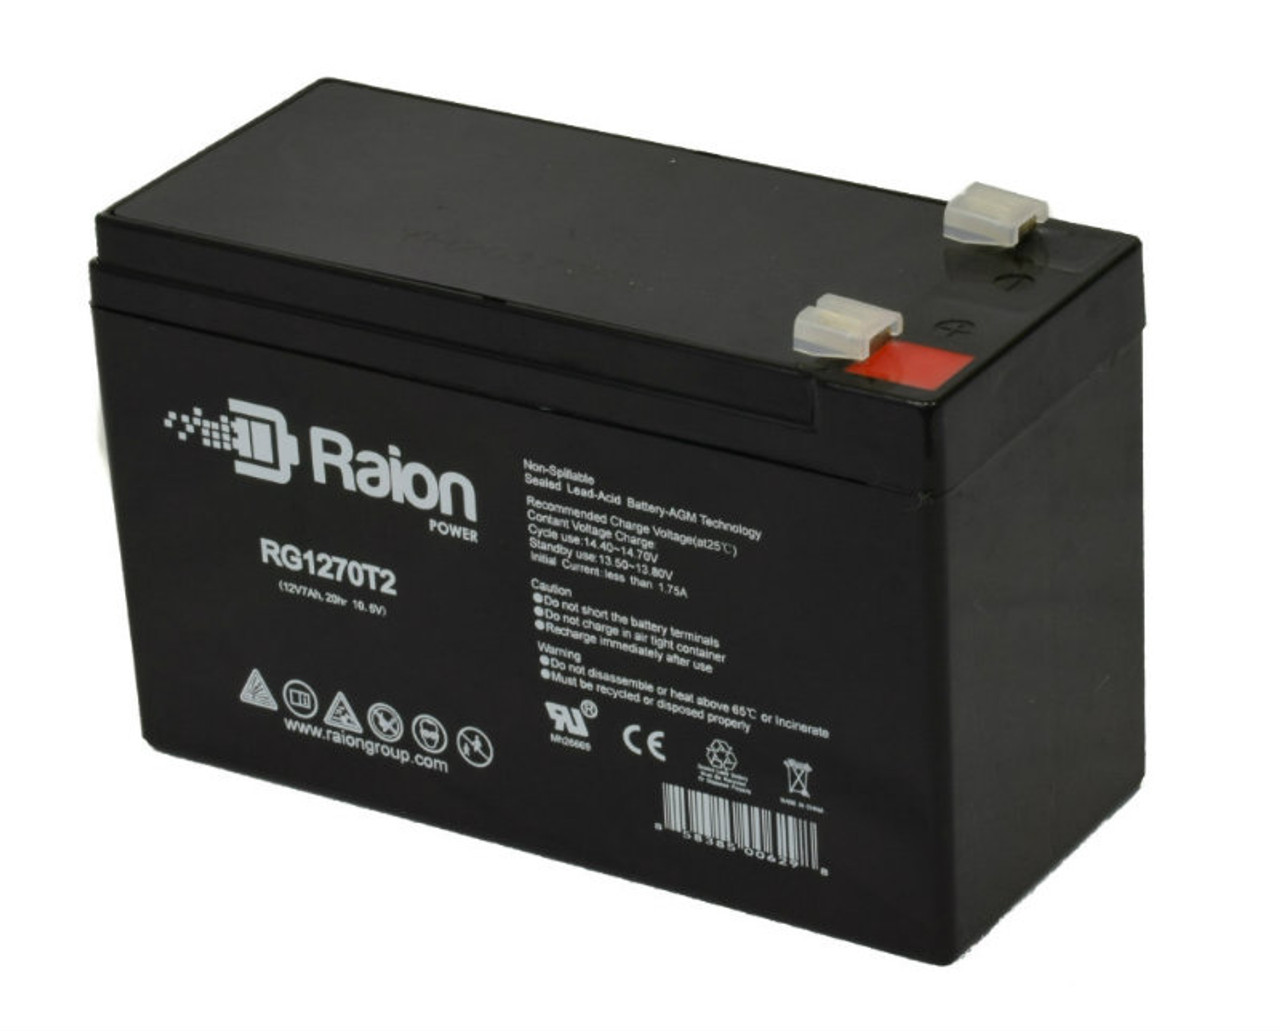 Raion Power RG1270T1 12V 7Ah Non-Spillable Replacement Battery for National Power GT026P4